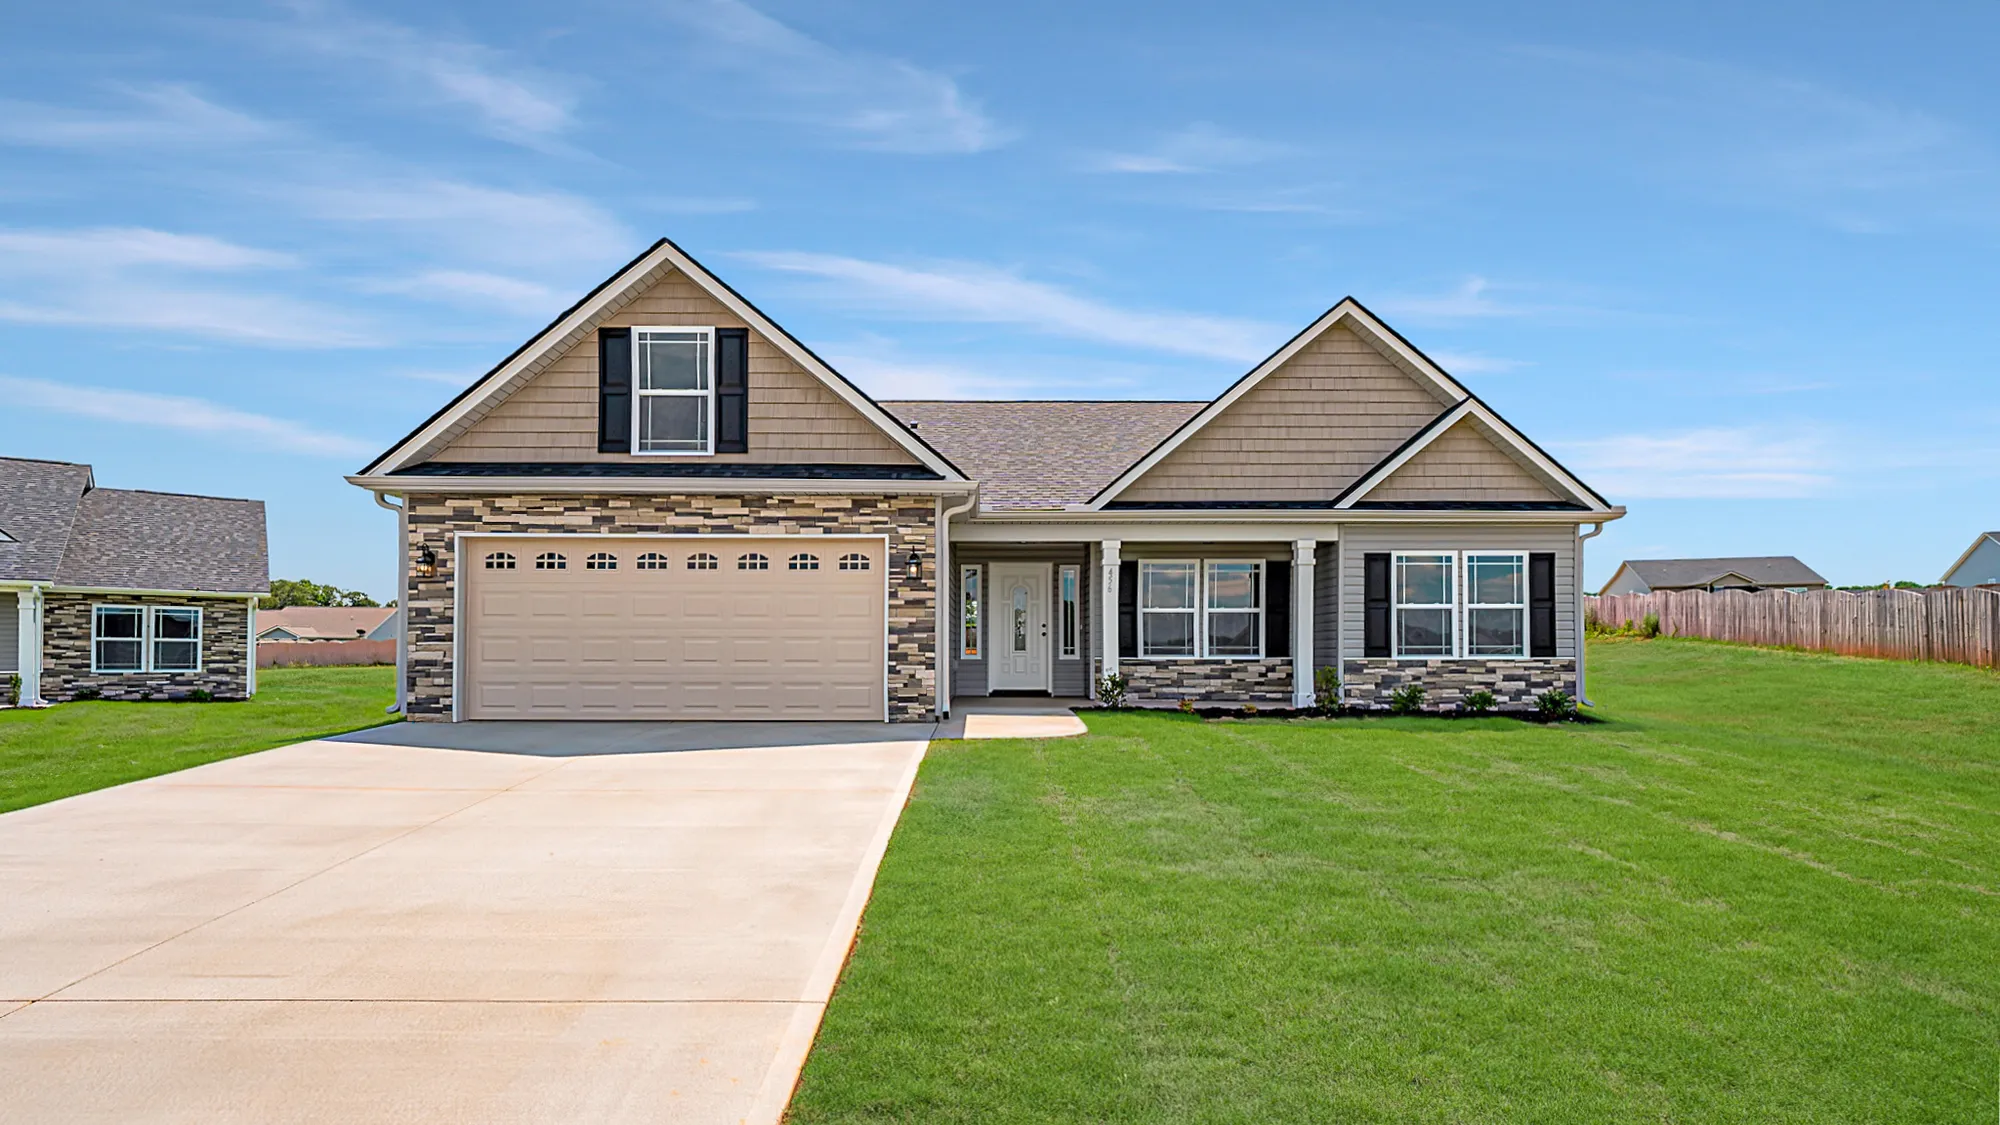 exterior of a new home in the beason pointe community